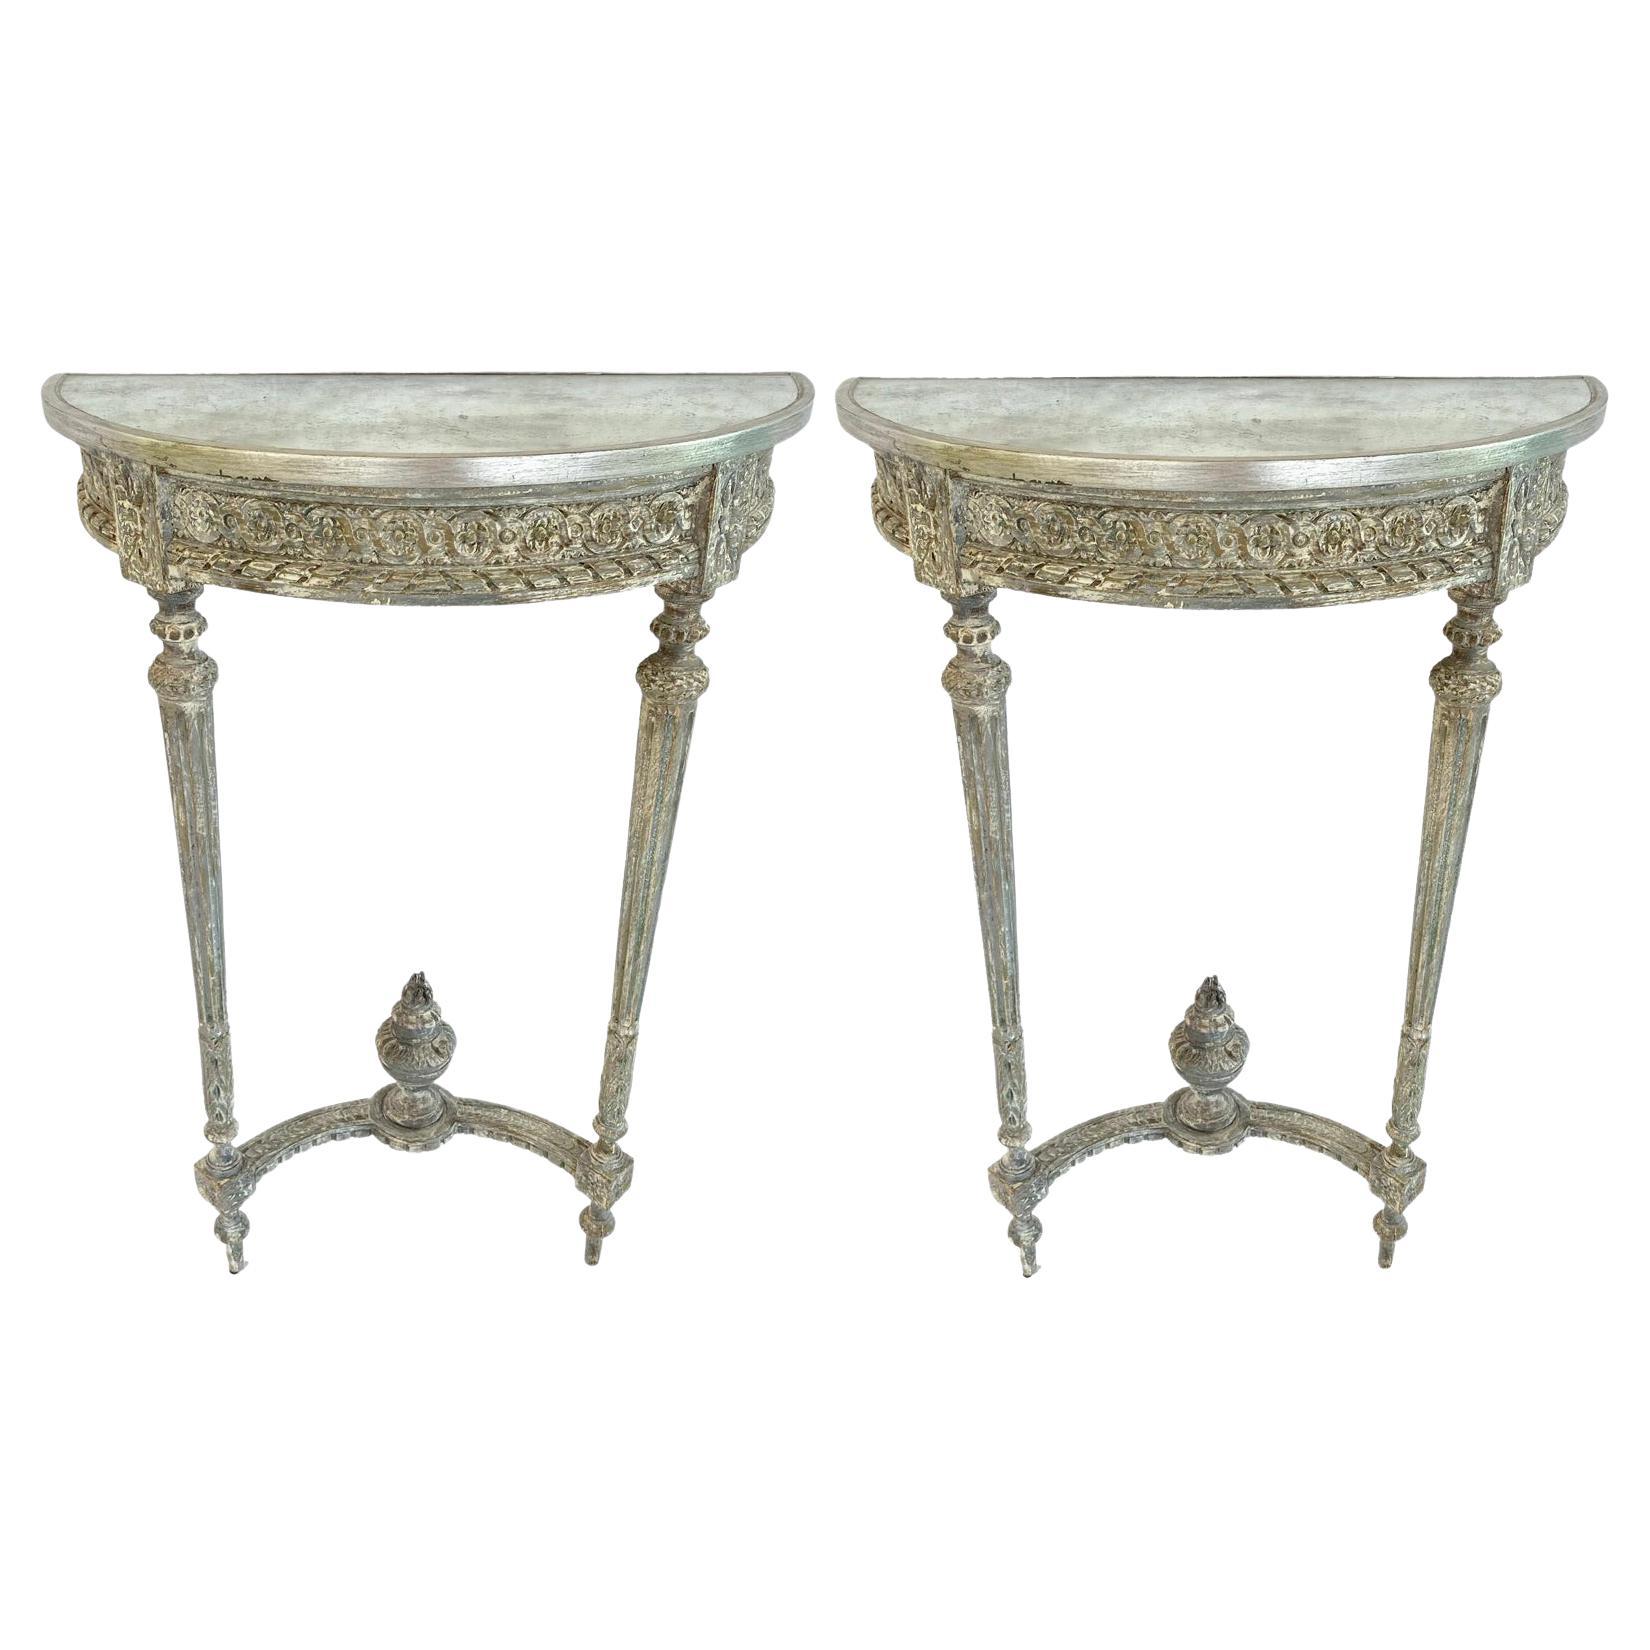 Pair of 19th Century Painted Demilune Consoles with Mirrored Tops